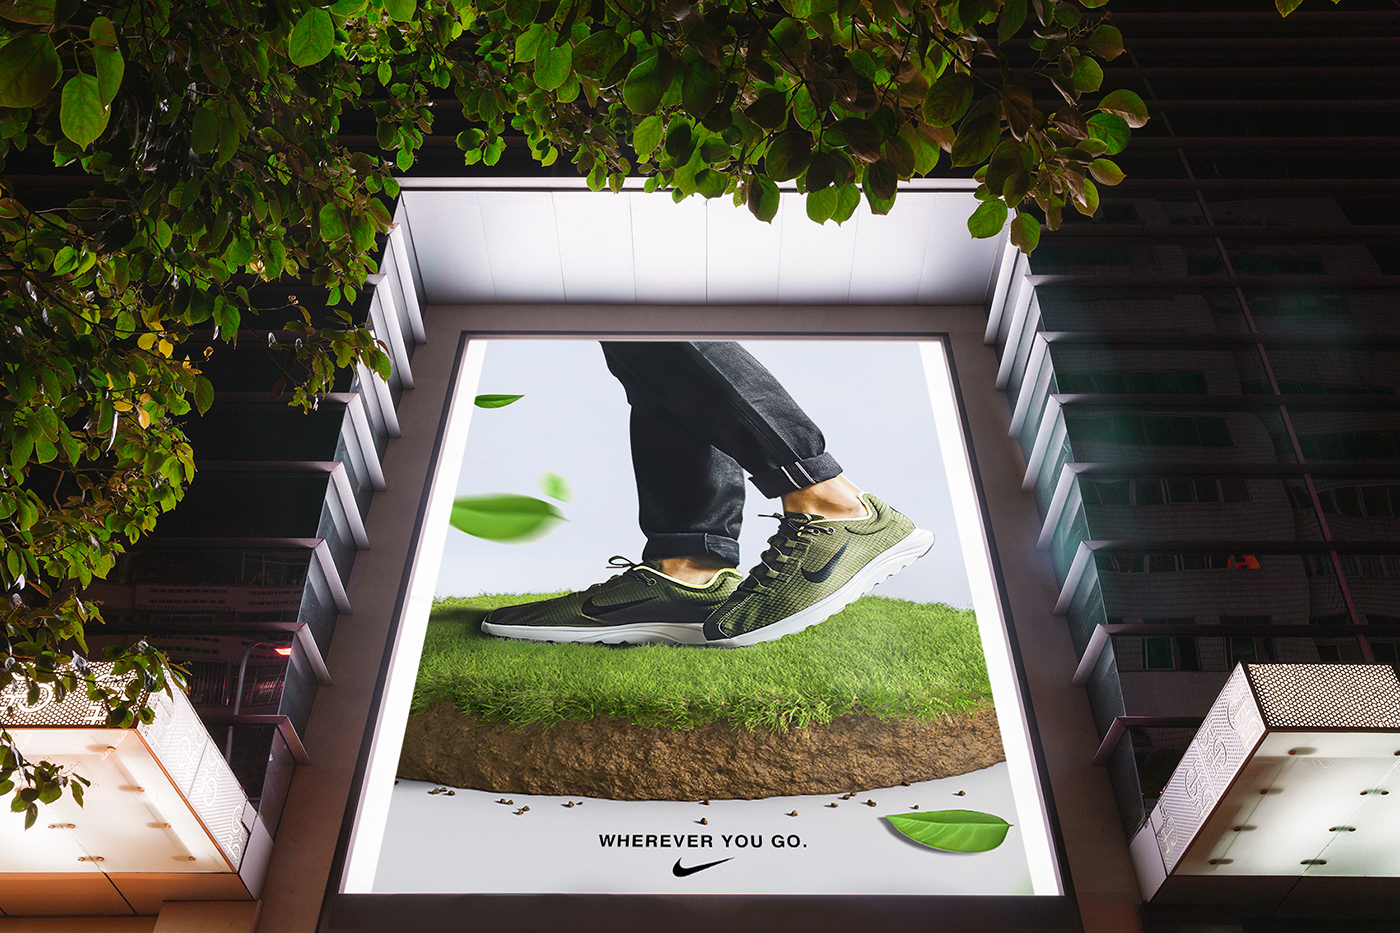 Advertising  campaign Nike sport poster graphic design  visual identity ads banner concept